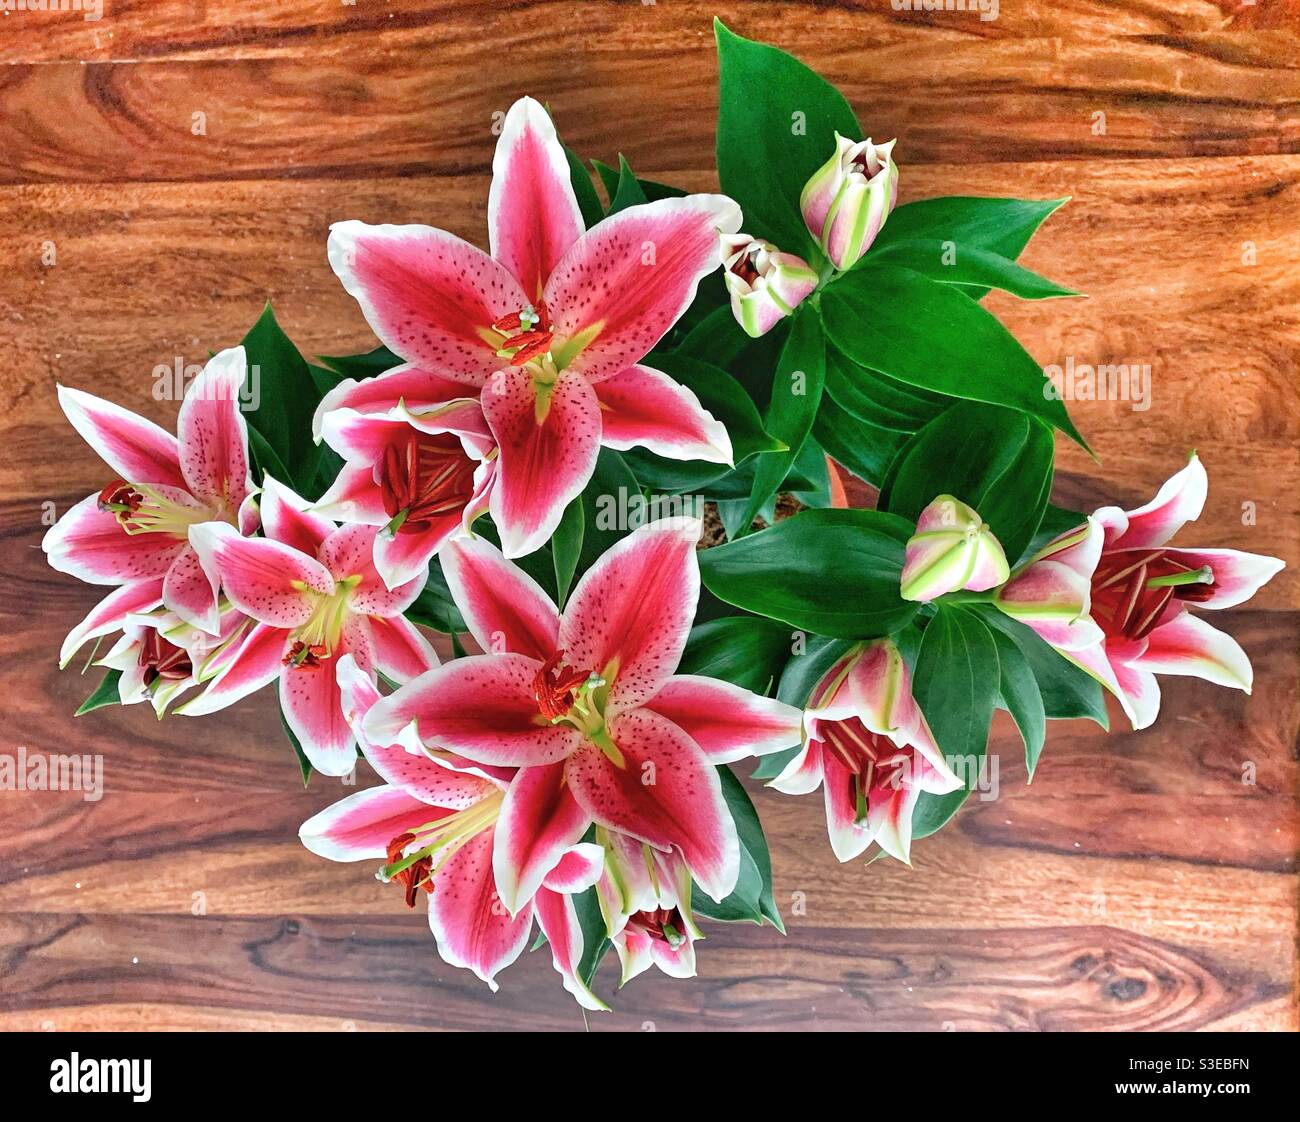 Pink lilies on a wooden table Stock Photo